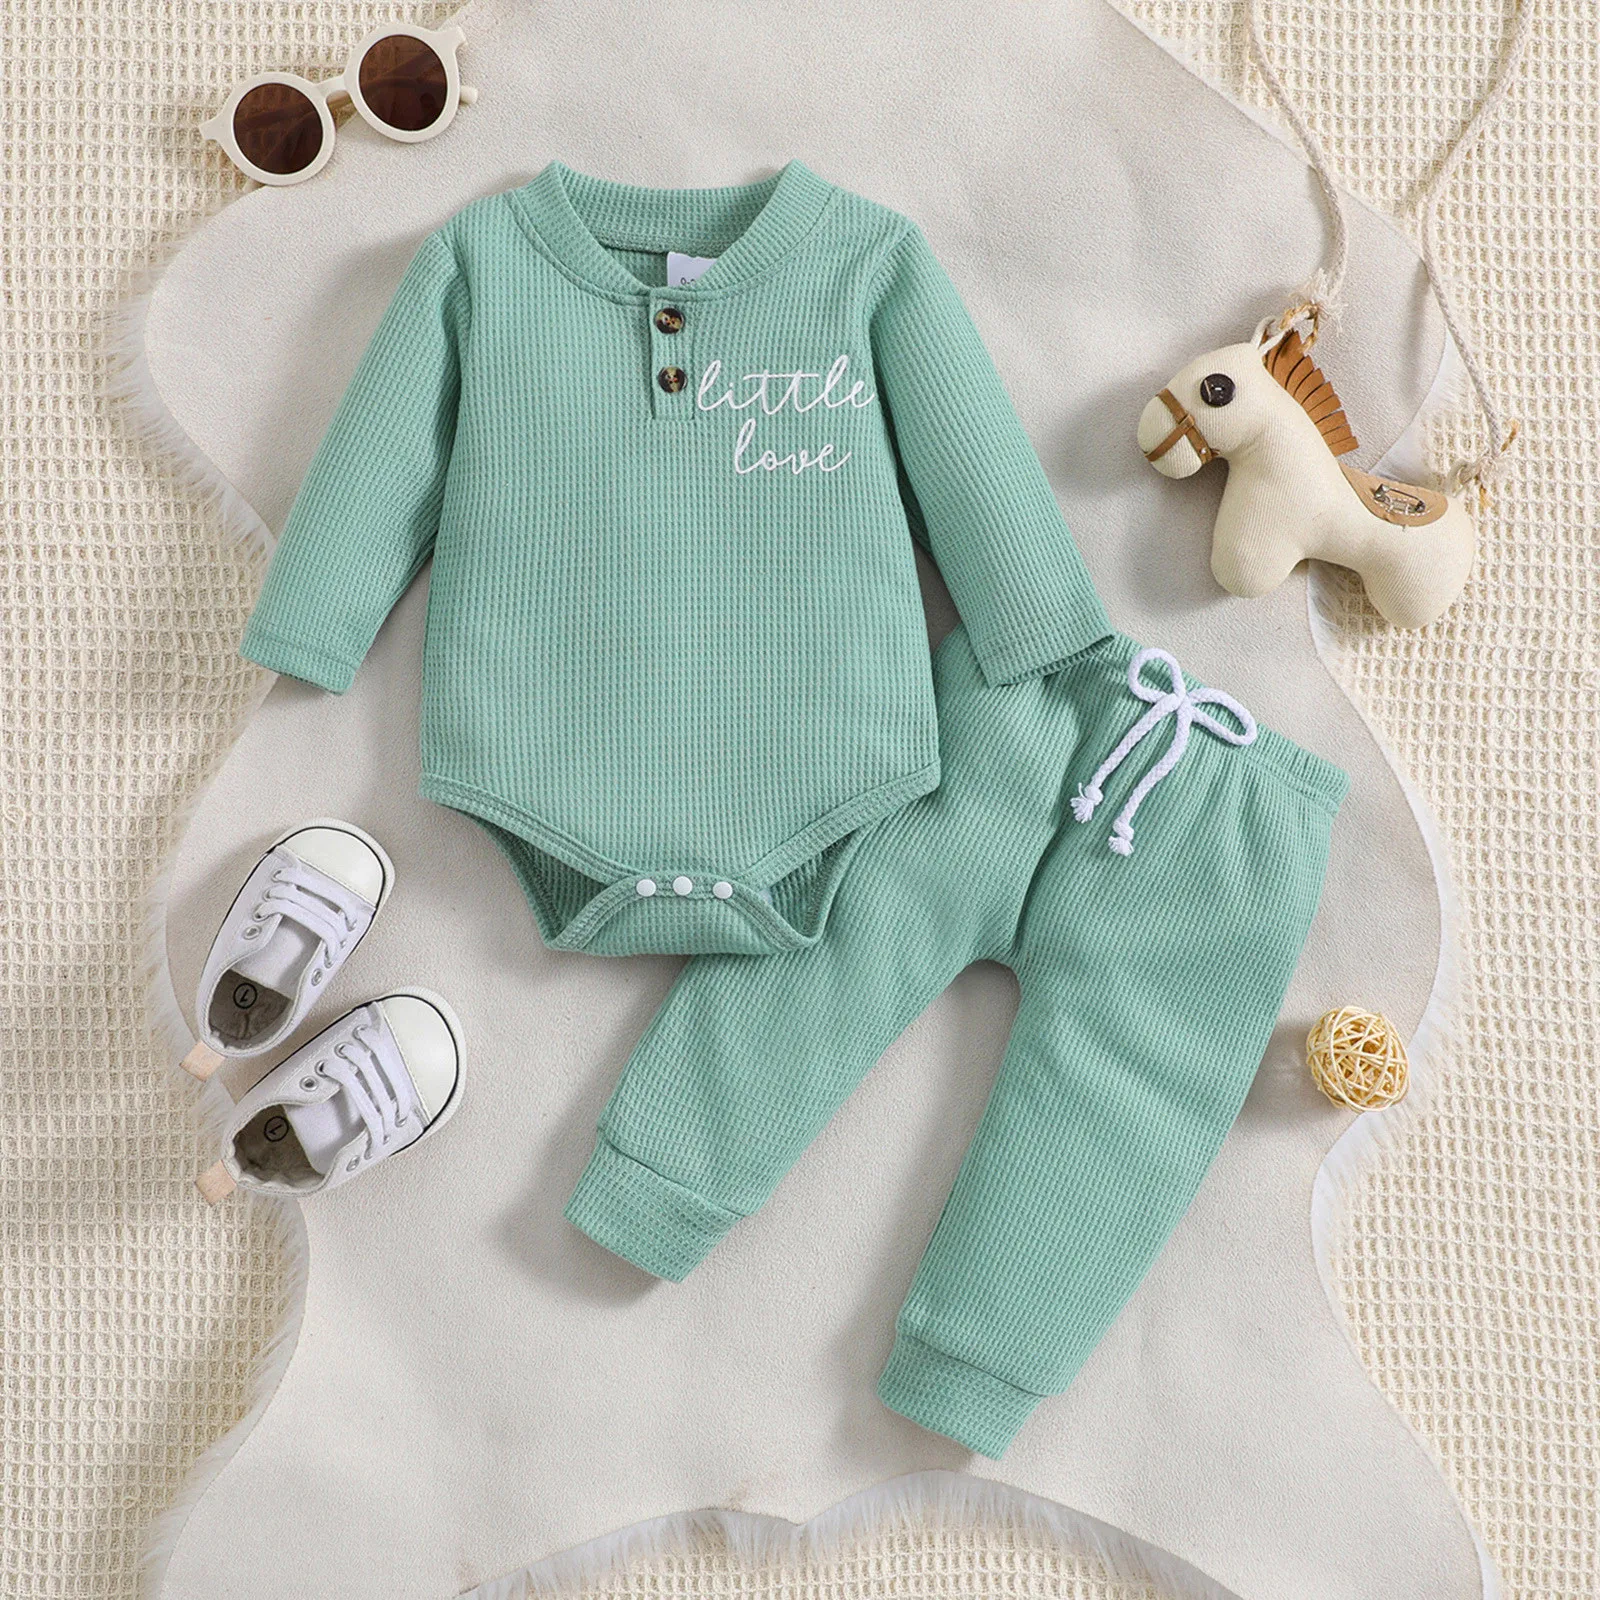 

Infant Newborn Baby Girls Boys Autumn Winter Clothes Sets Ribbed Clothes Long Sleeve Bodysuits+Elastic Pants 2Pcs Outfits 0-24M